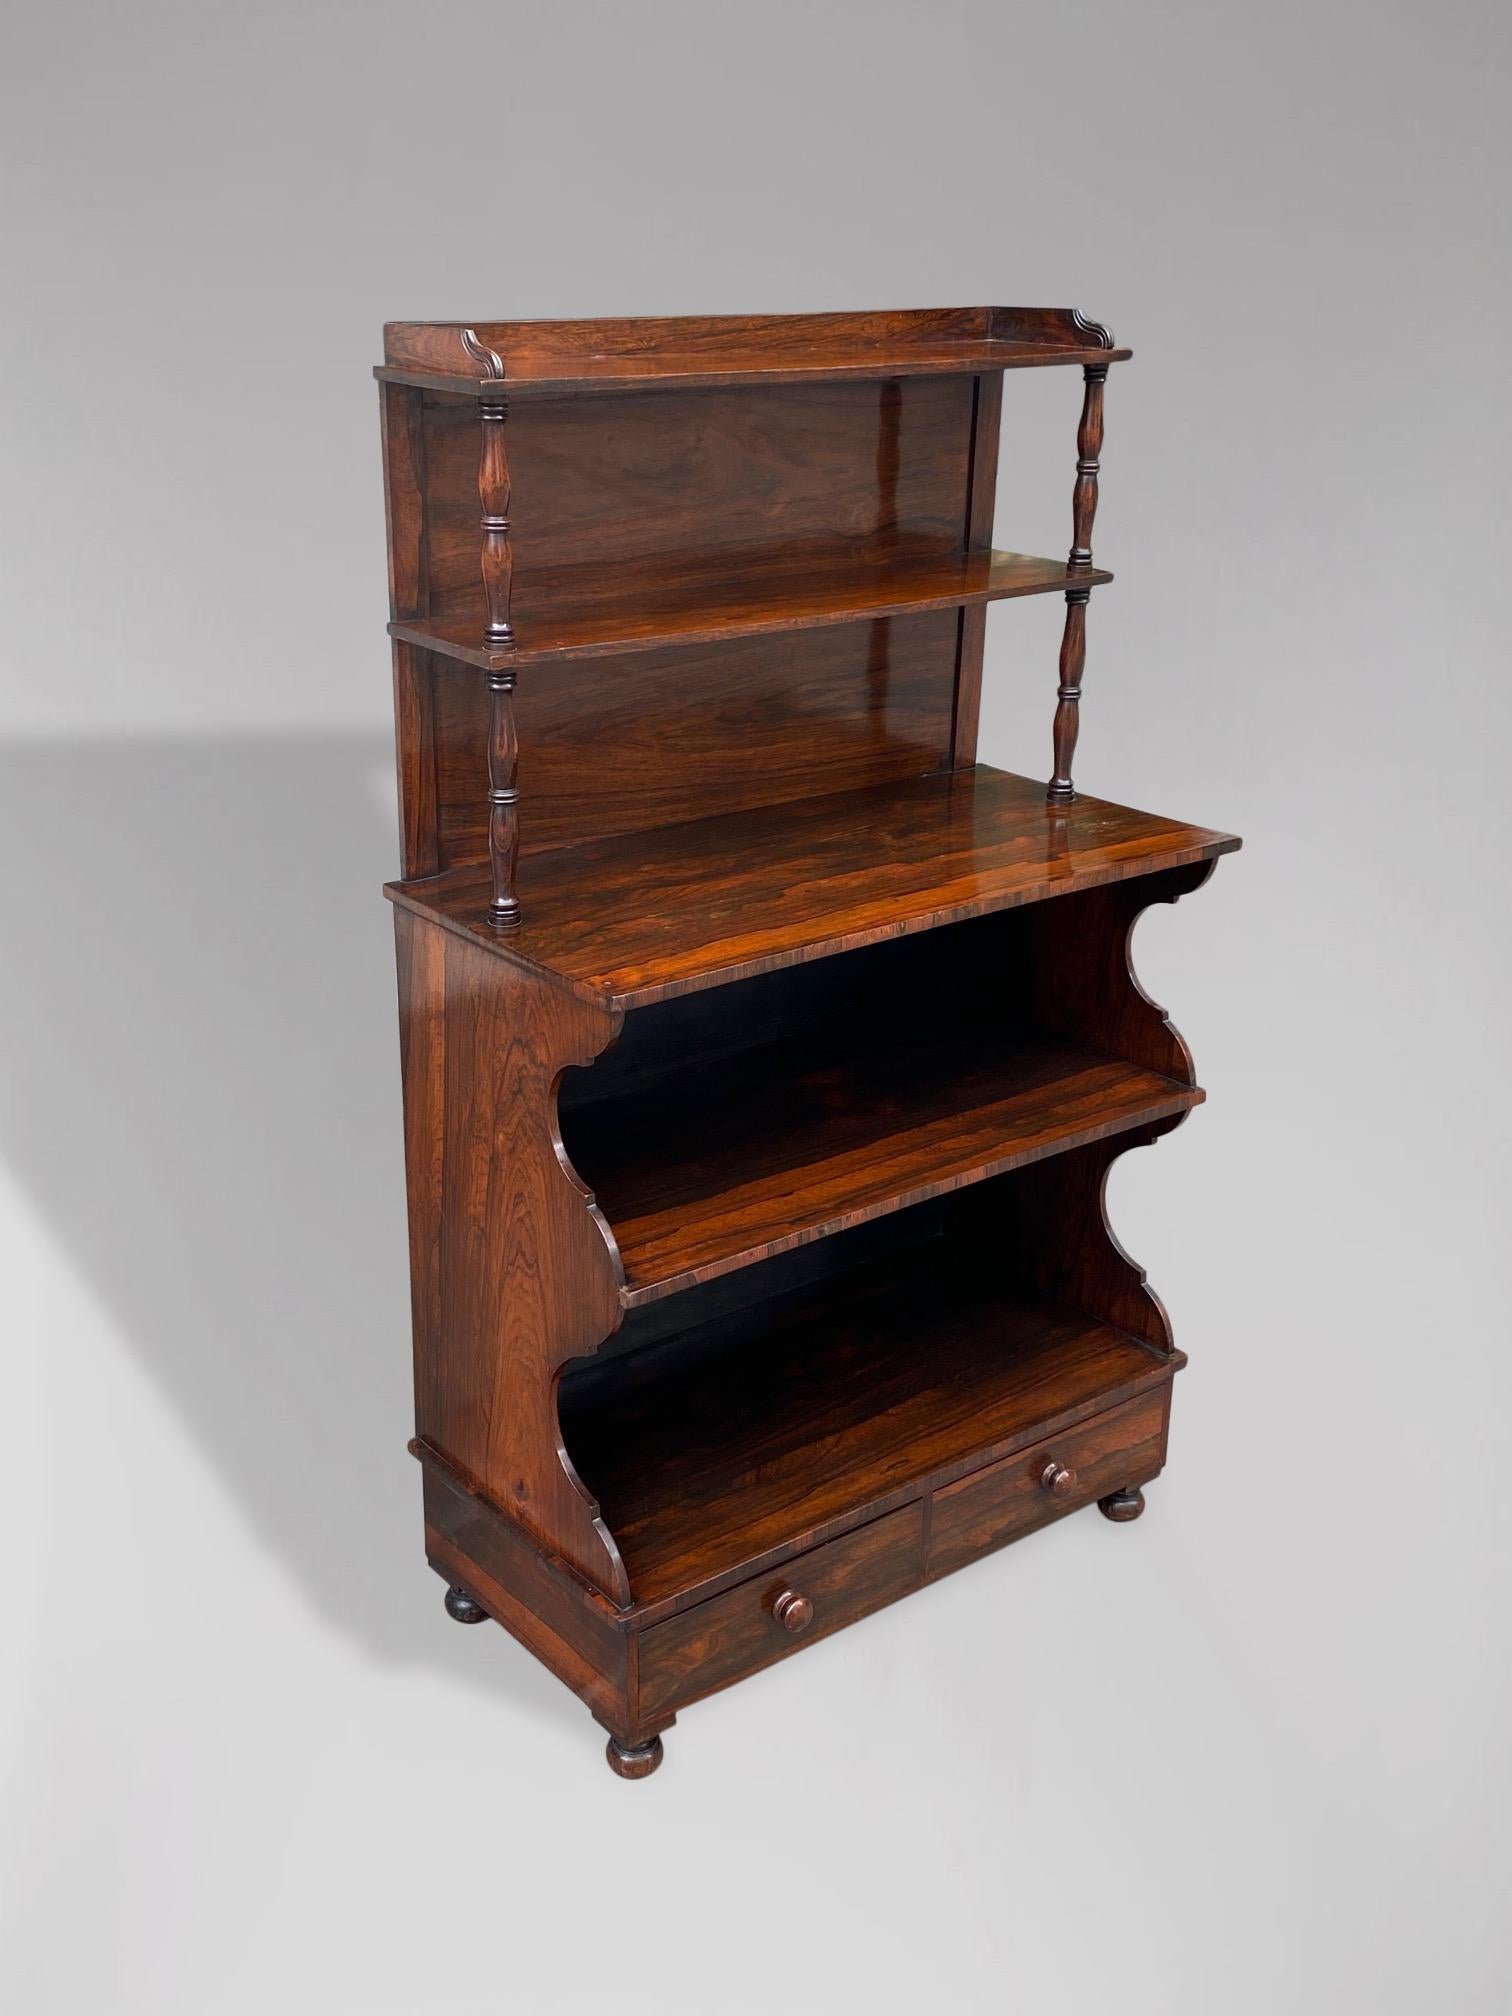 An unusual and very fine early 19th century rosewood waterfall open bookcase. A three quarter gallery superstructure with shelves above a shaped open bookcase with a pair of drawers, all standing on 4 bun feet with beautiful small brass castors.